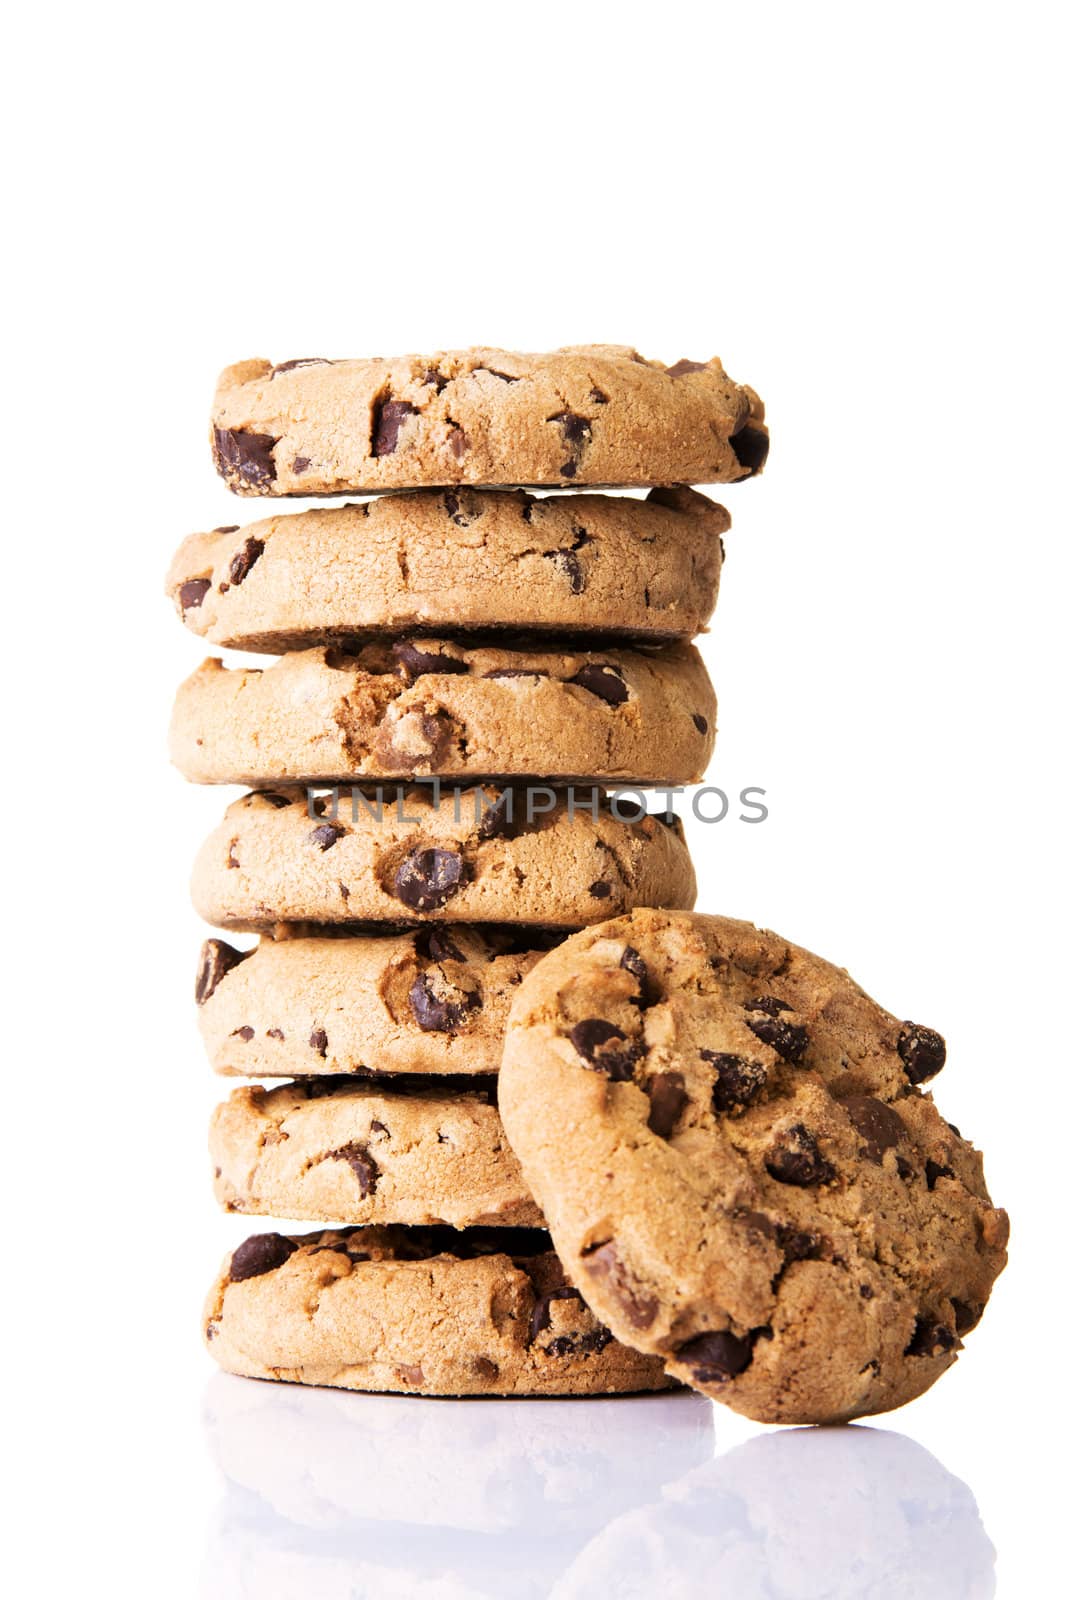 Pile of chocolate cookies by BDS